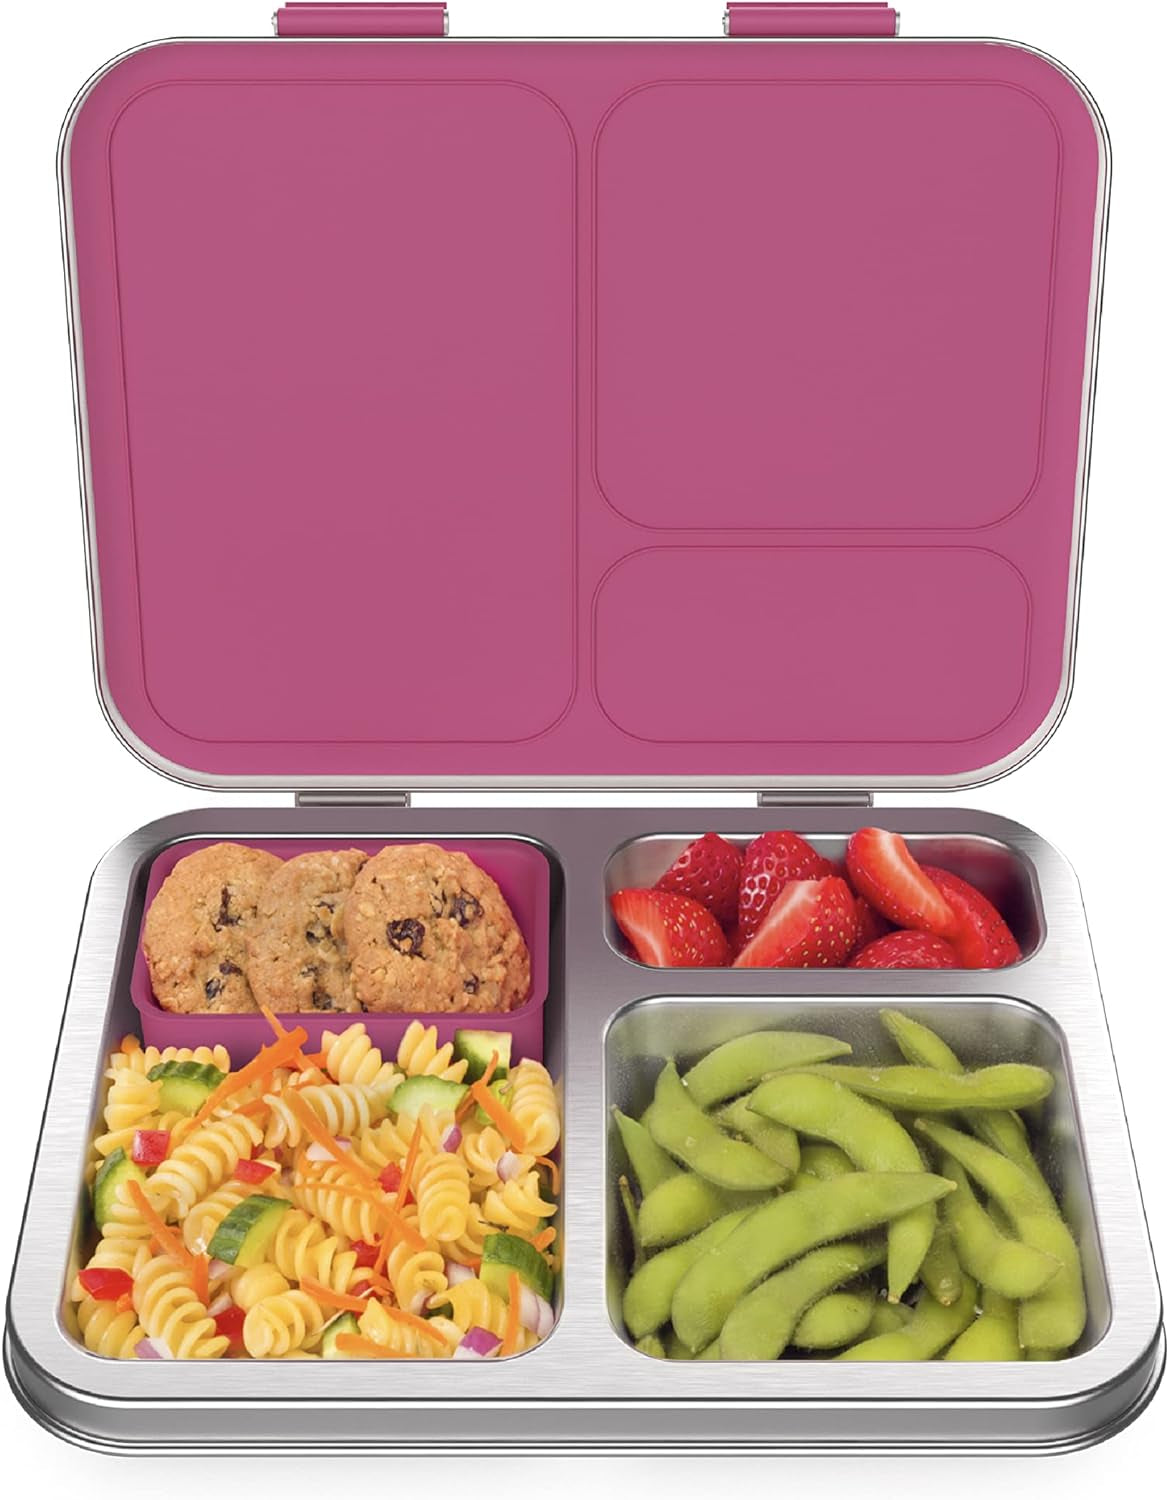 ® Kids Stainless Steel Leak-Resistant Lunch Box - Bento-Style Redesigned in 2022 W/Upgraded Latches, 3 Compartments, & Extra Container - Eco-Friendly, Dishwasher Safe, Patented Design (Blue)